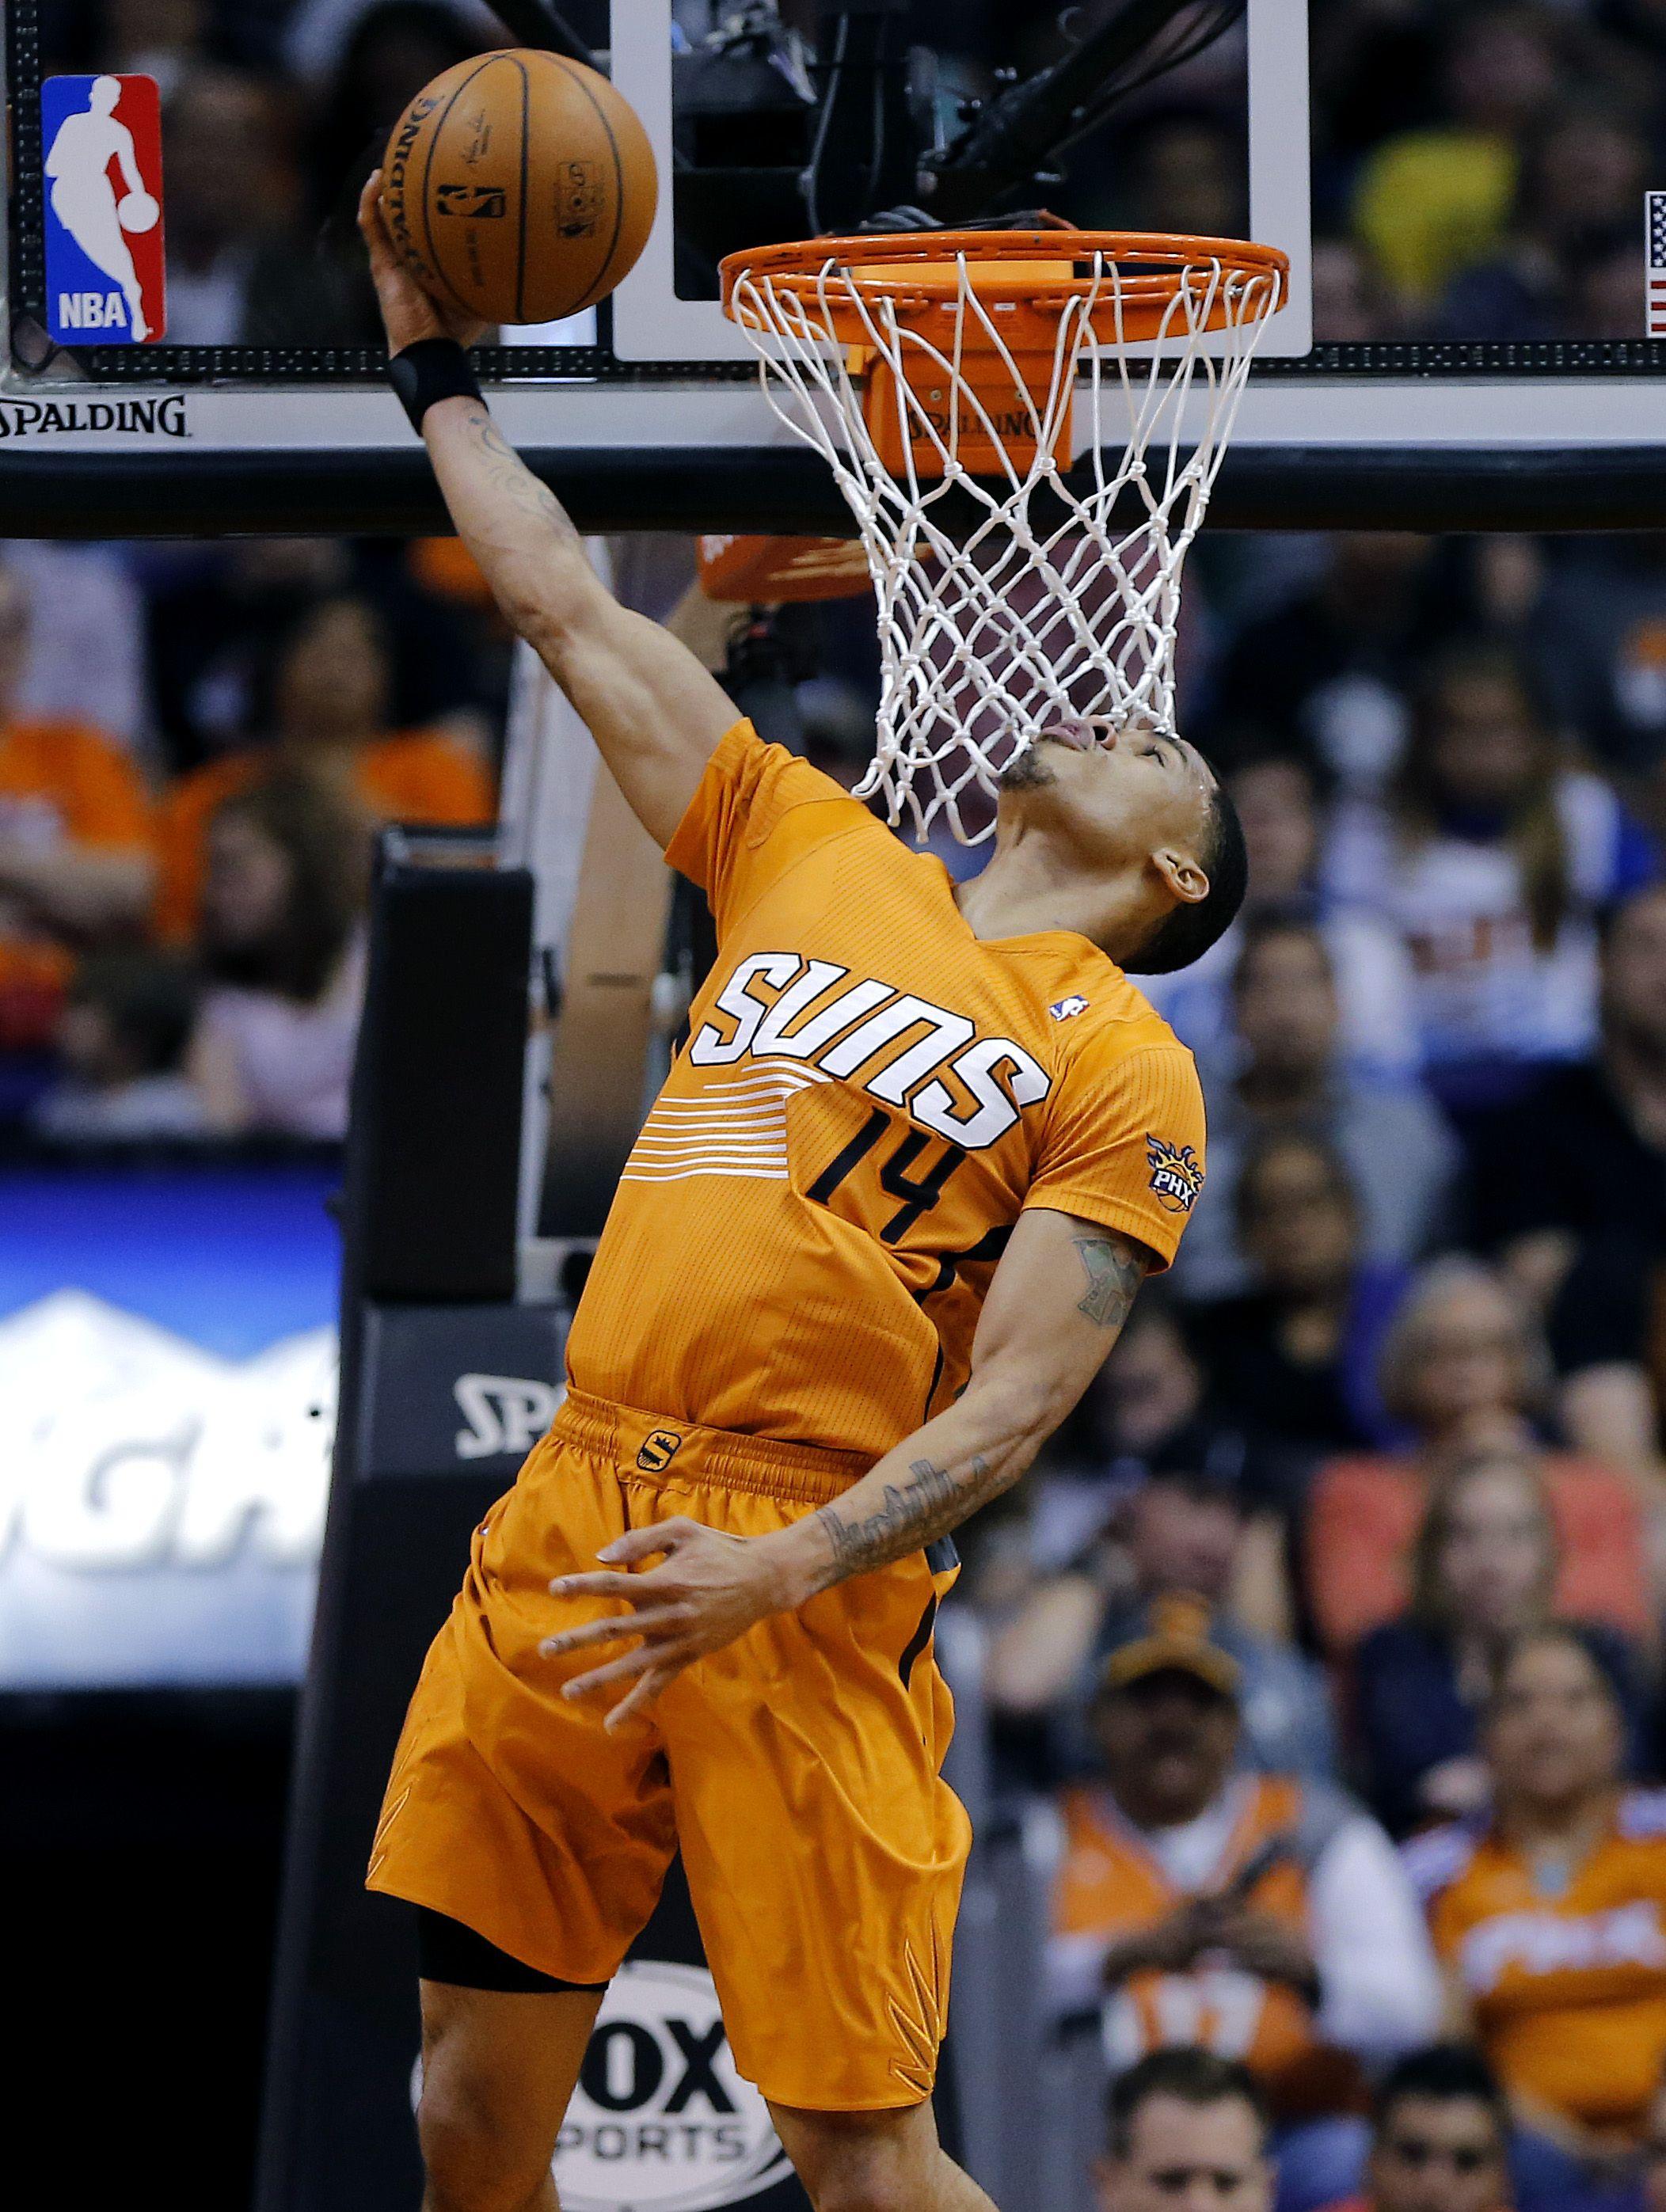 ESPN NBA insider: Gerald Green could sustain this level of play